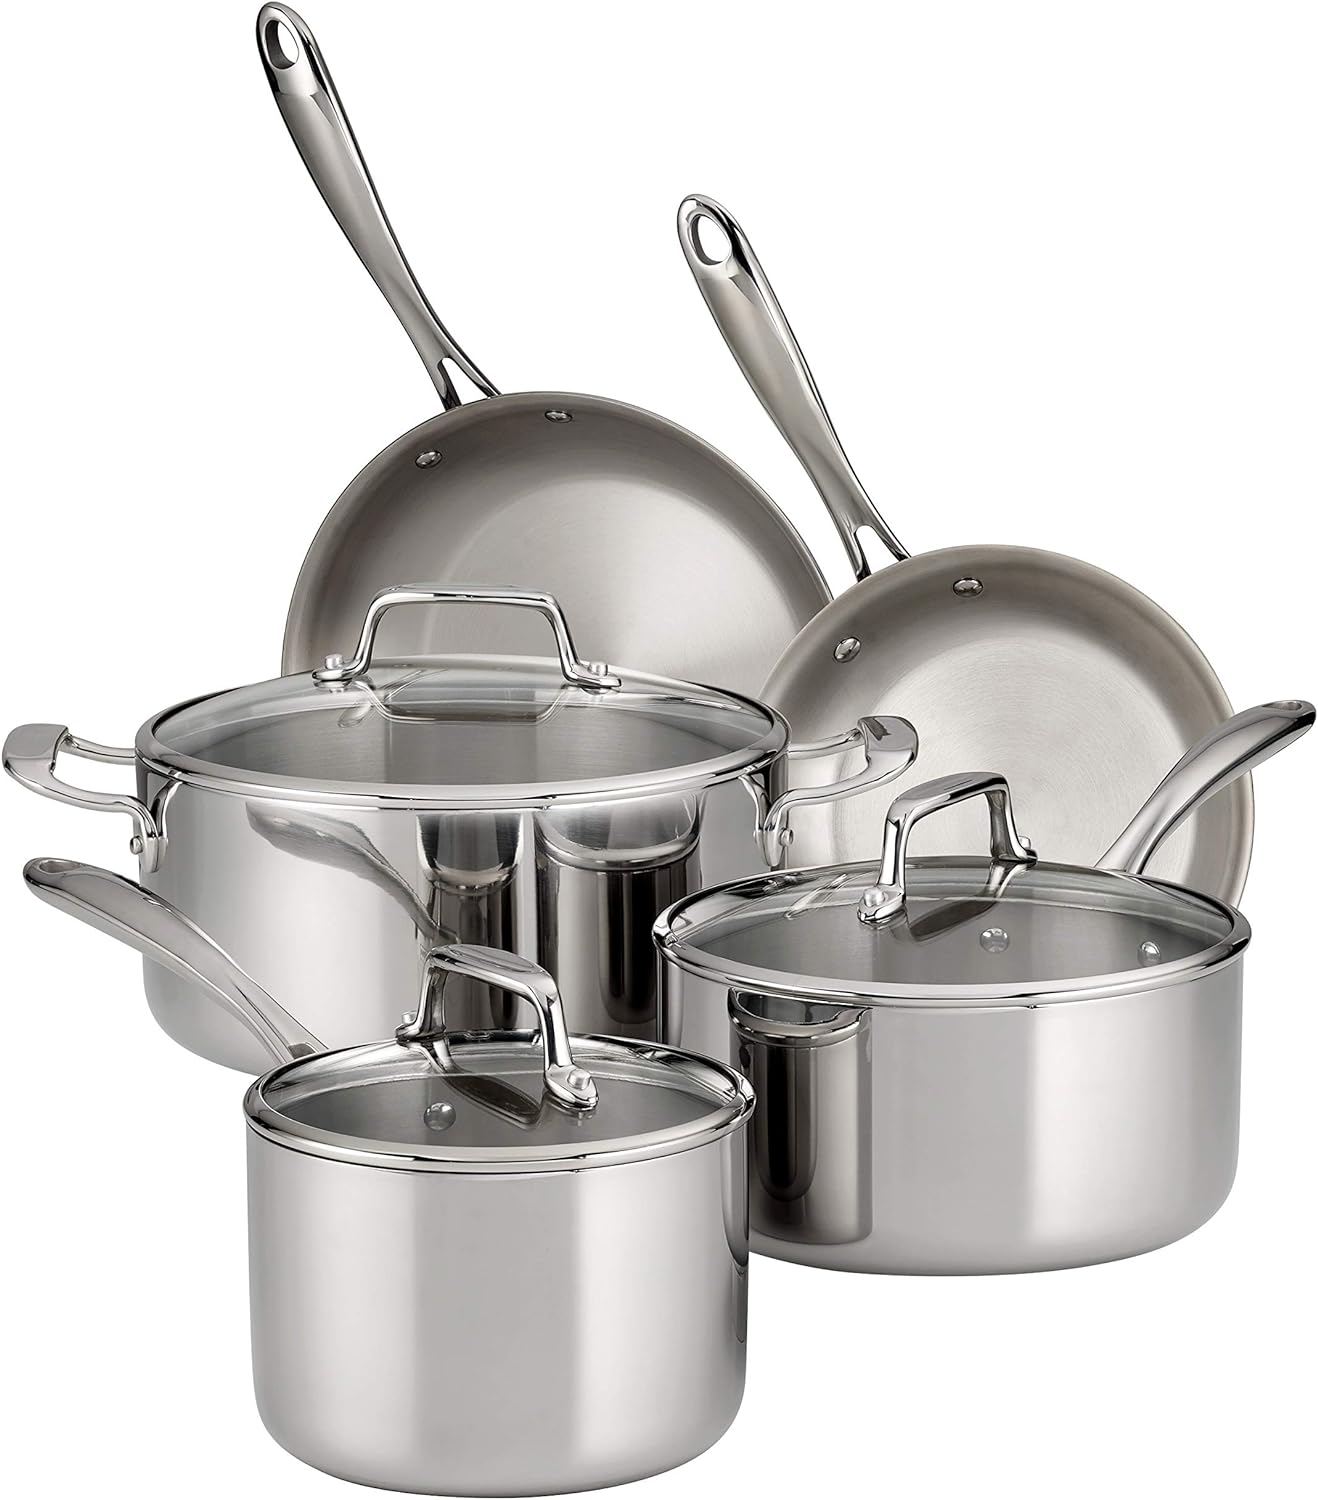 Tramontina 12-Piece Tri-Ply Clad Stainless Steel Cookware Set